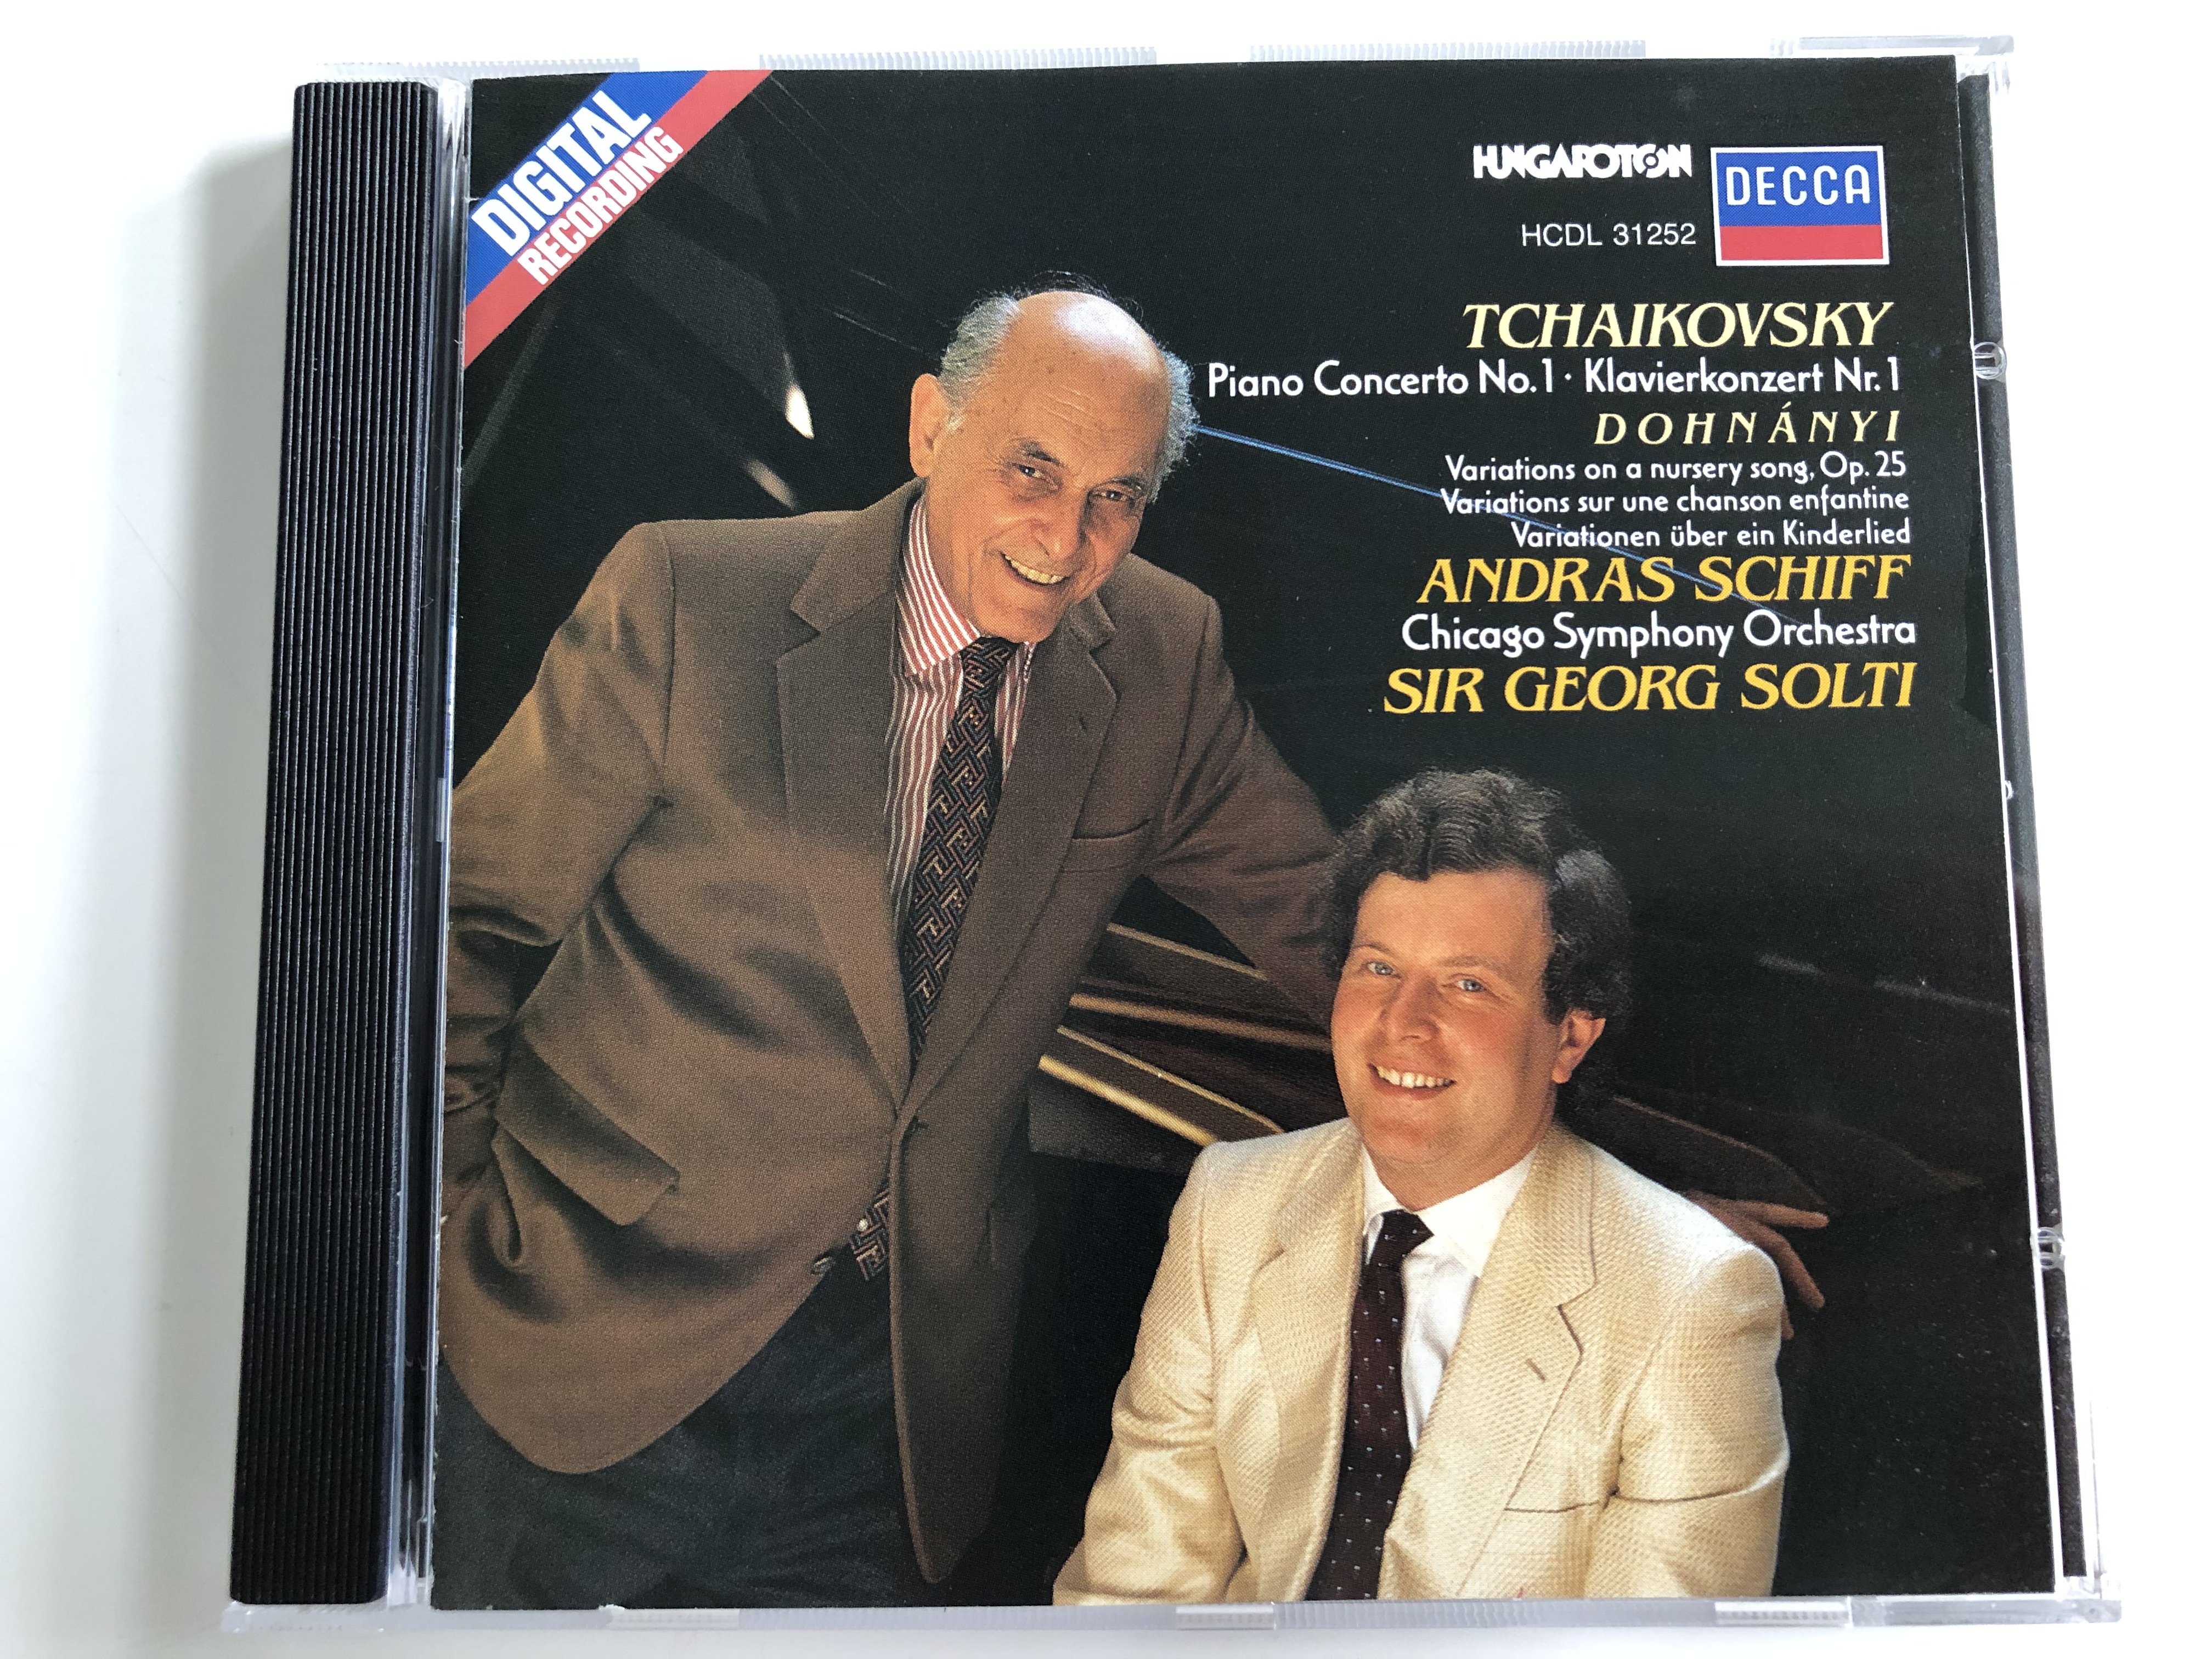 tchaikovsky-piano-concerto-no.1-klavierkonzert-nr.1-dohn-nyi-variations-on-a-nursery-song.-op.-25-andras-schiff-chicago-symphony-orchestra-conducted-sir-georg-solti-hungaroton-audio-cd-1-.jpg